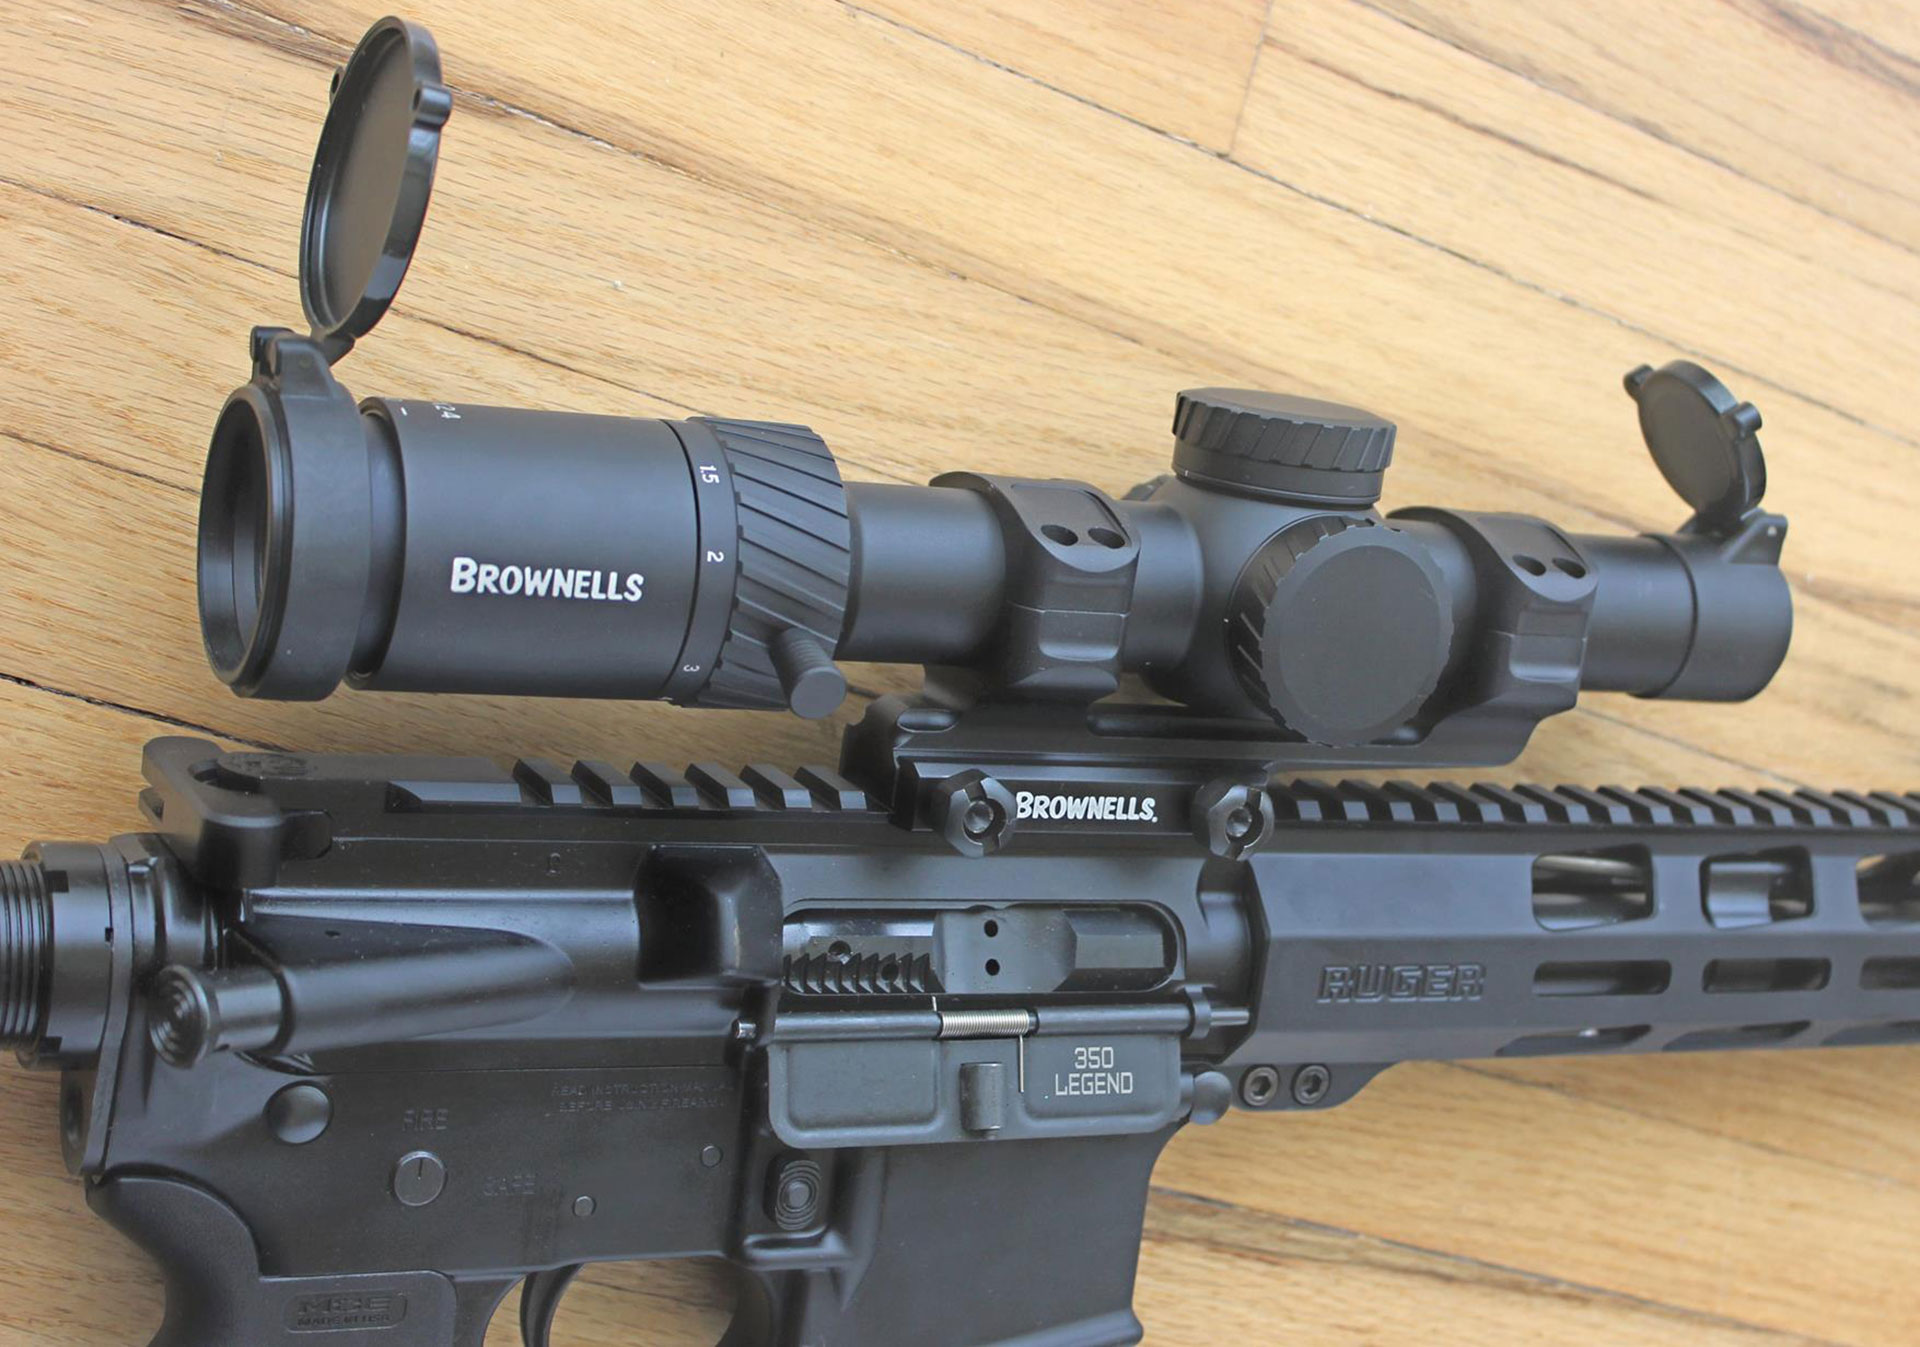 The Ruger AR-556 is representative of the flexible, factory-produced AR carbines available chambered in .350 Legend.